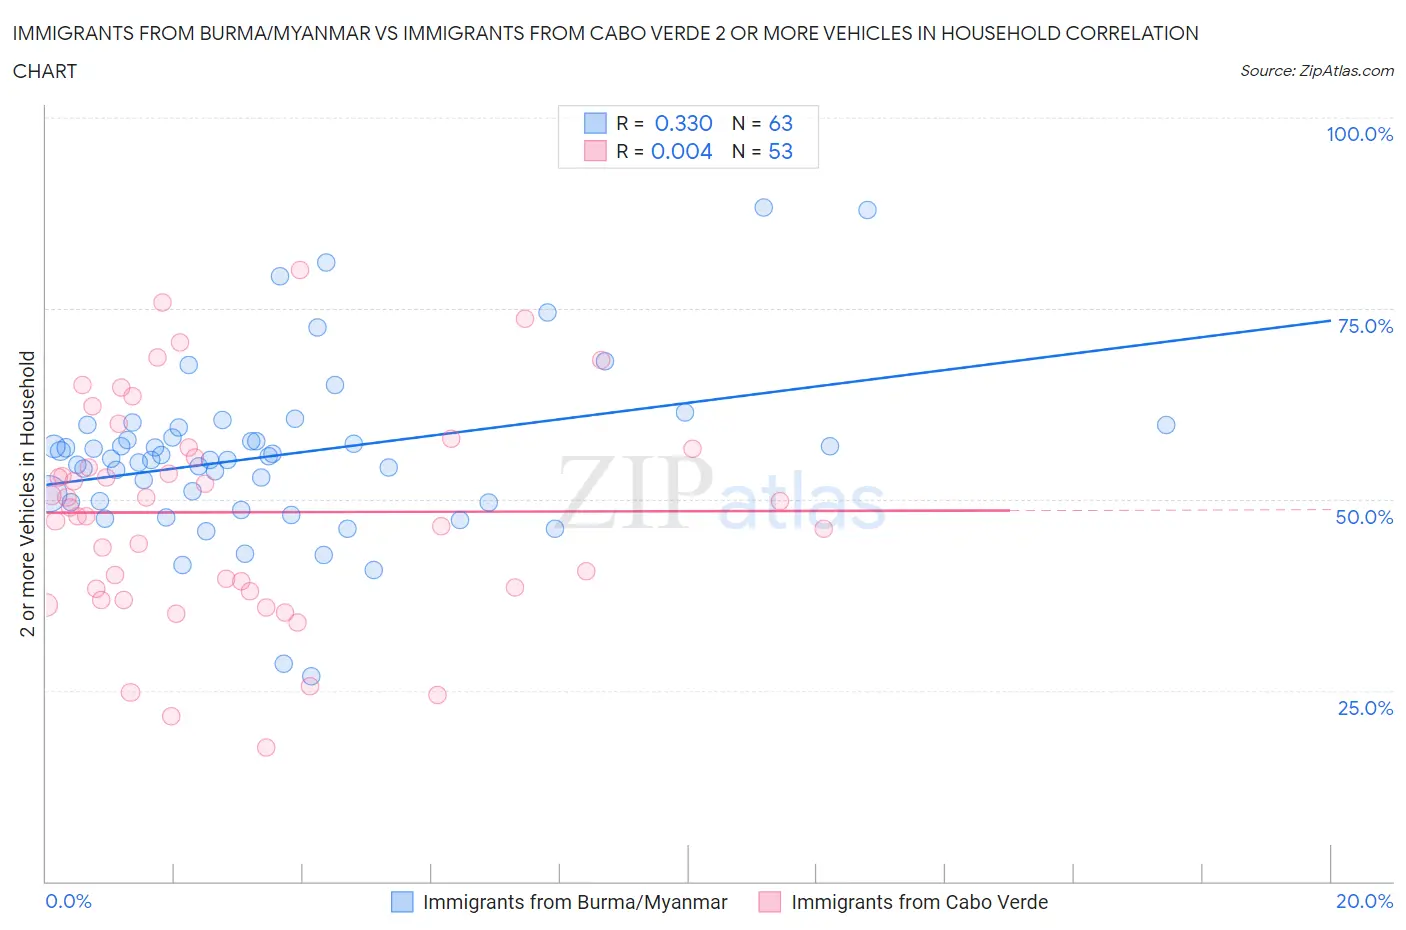 Immigrants from Burma/Myanmar vs Immigrants from Cabo Verde 2 or more Vehicles in Household